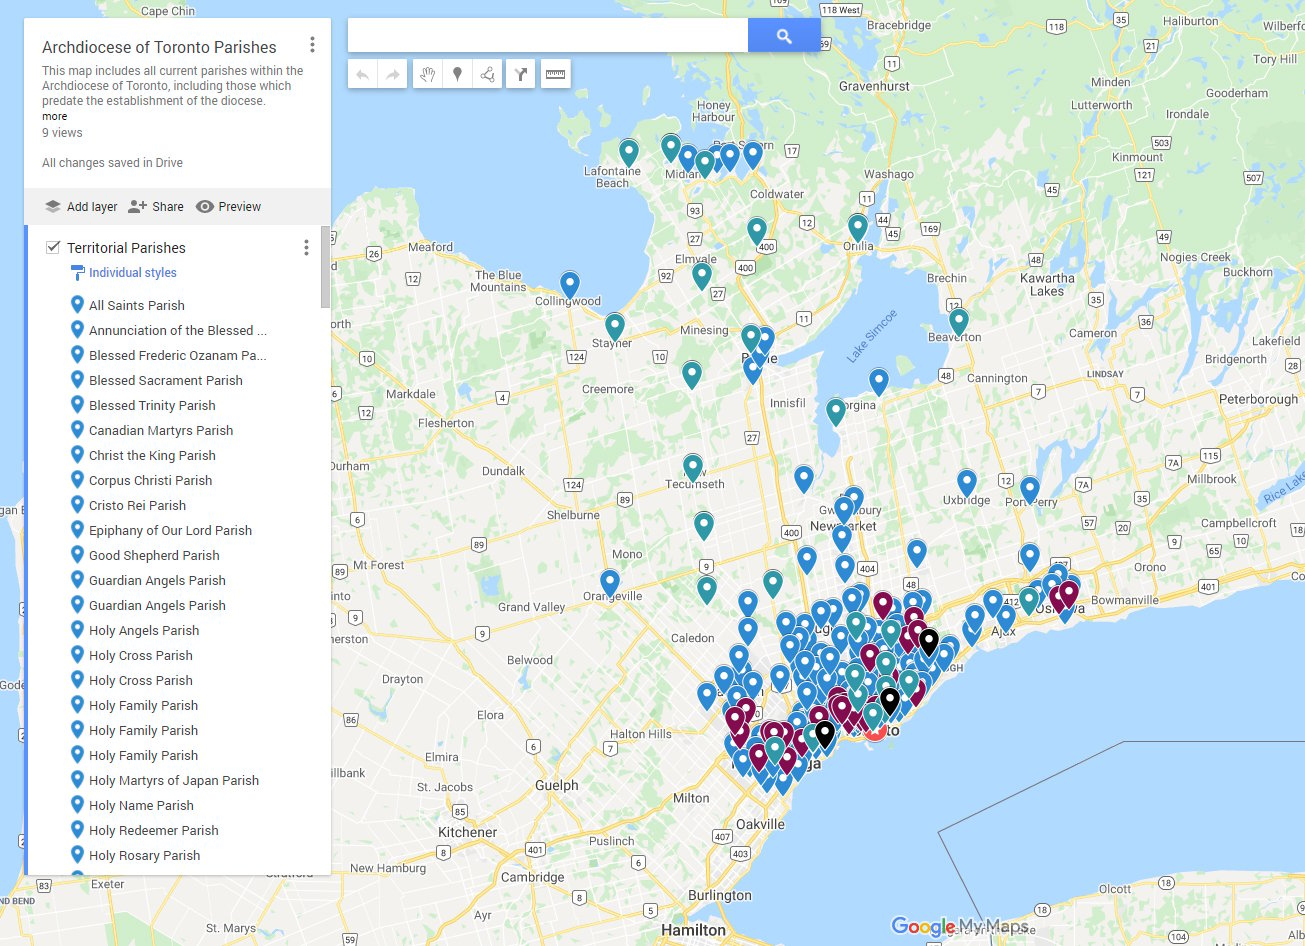 Google Map of Archdiocese of Toronto Parish Churches